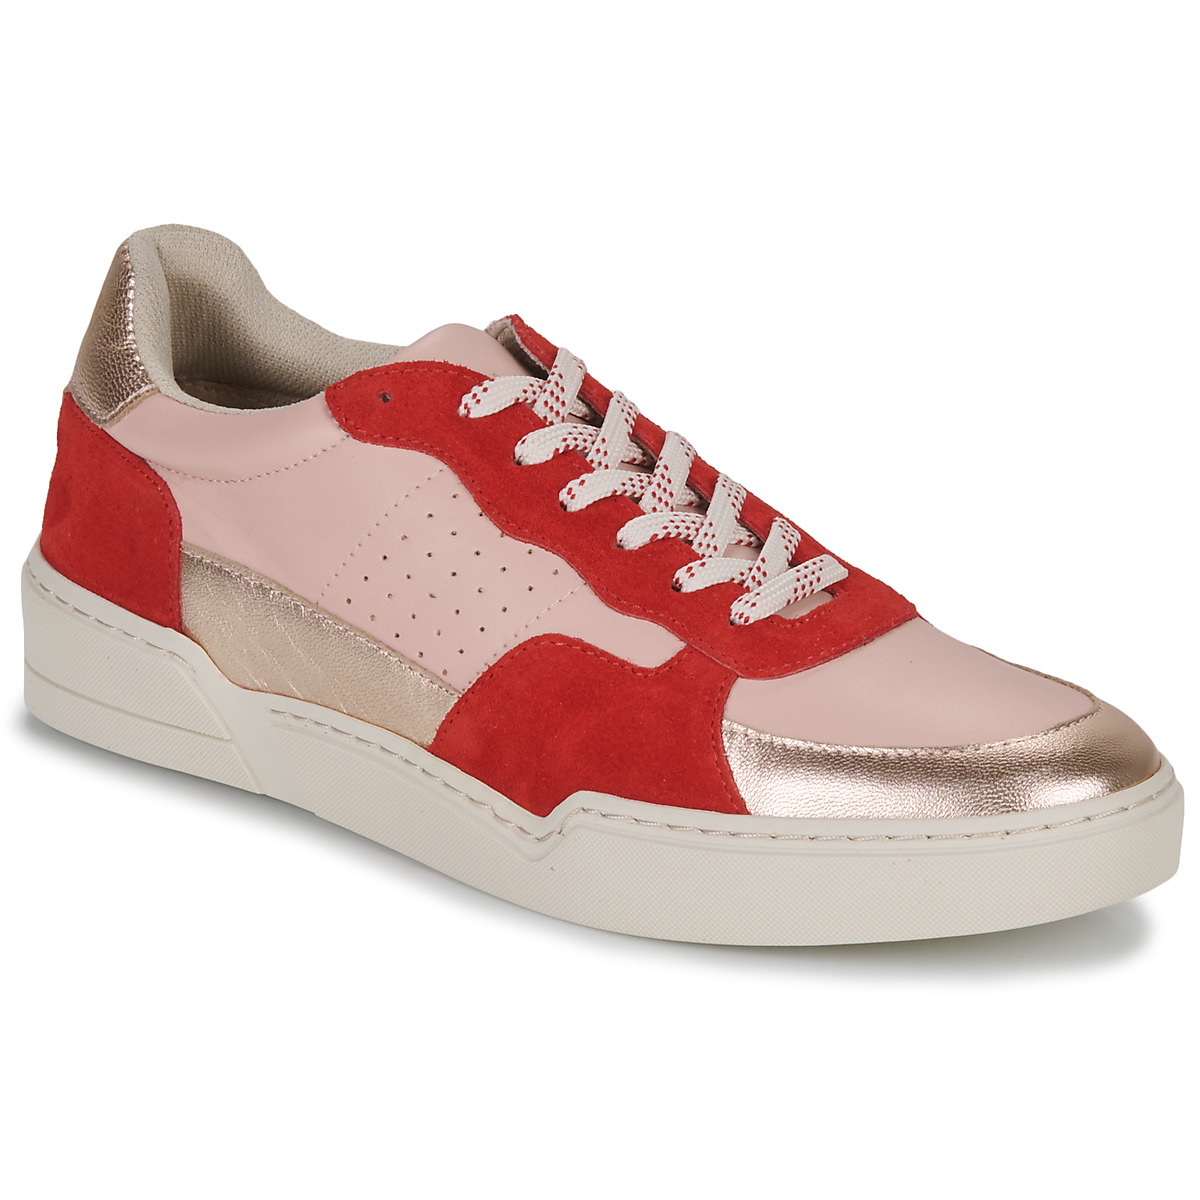 Shoes Women Low top trainers Fericelli DAME Pink / Red